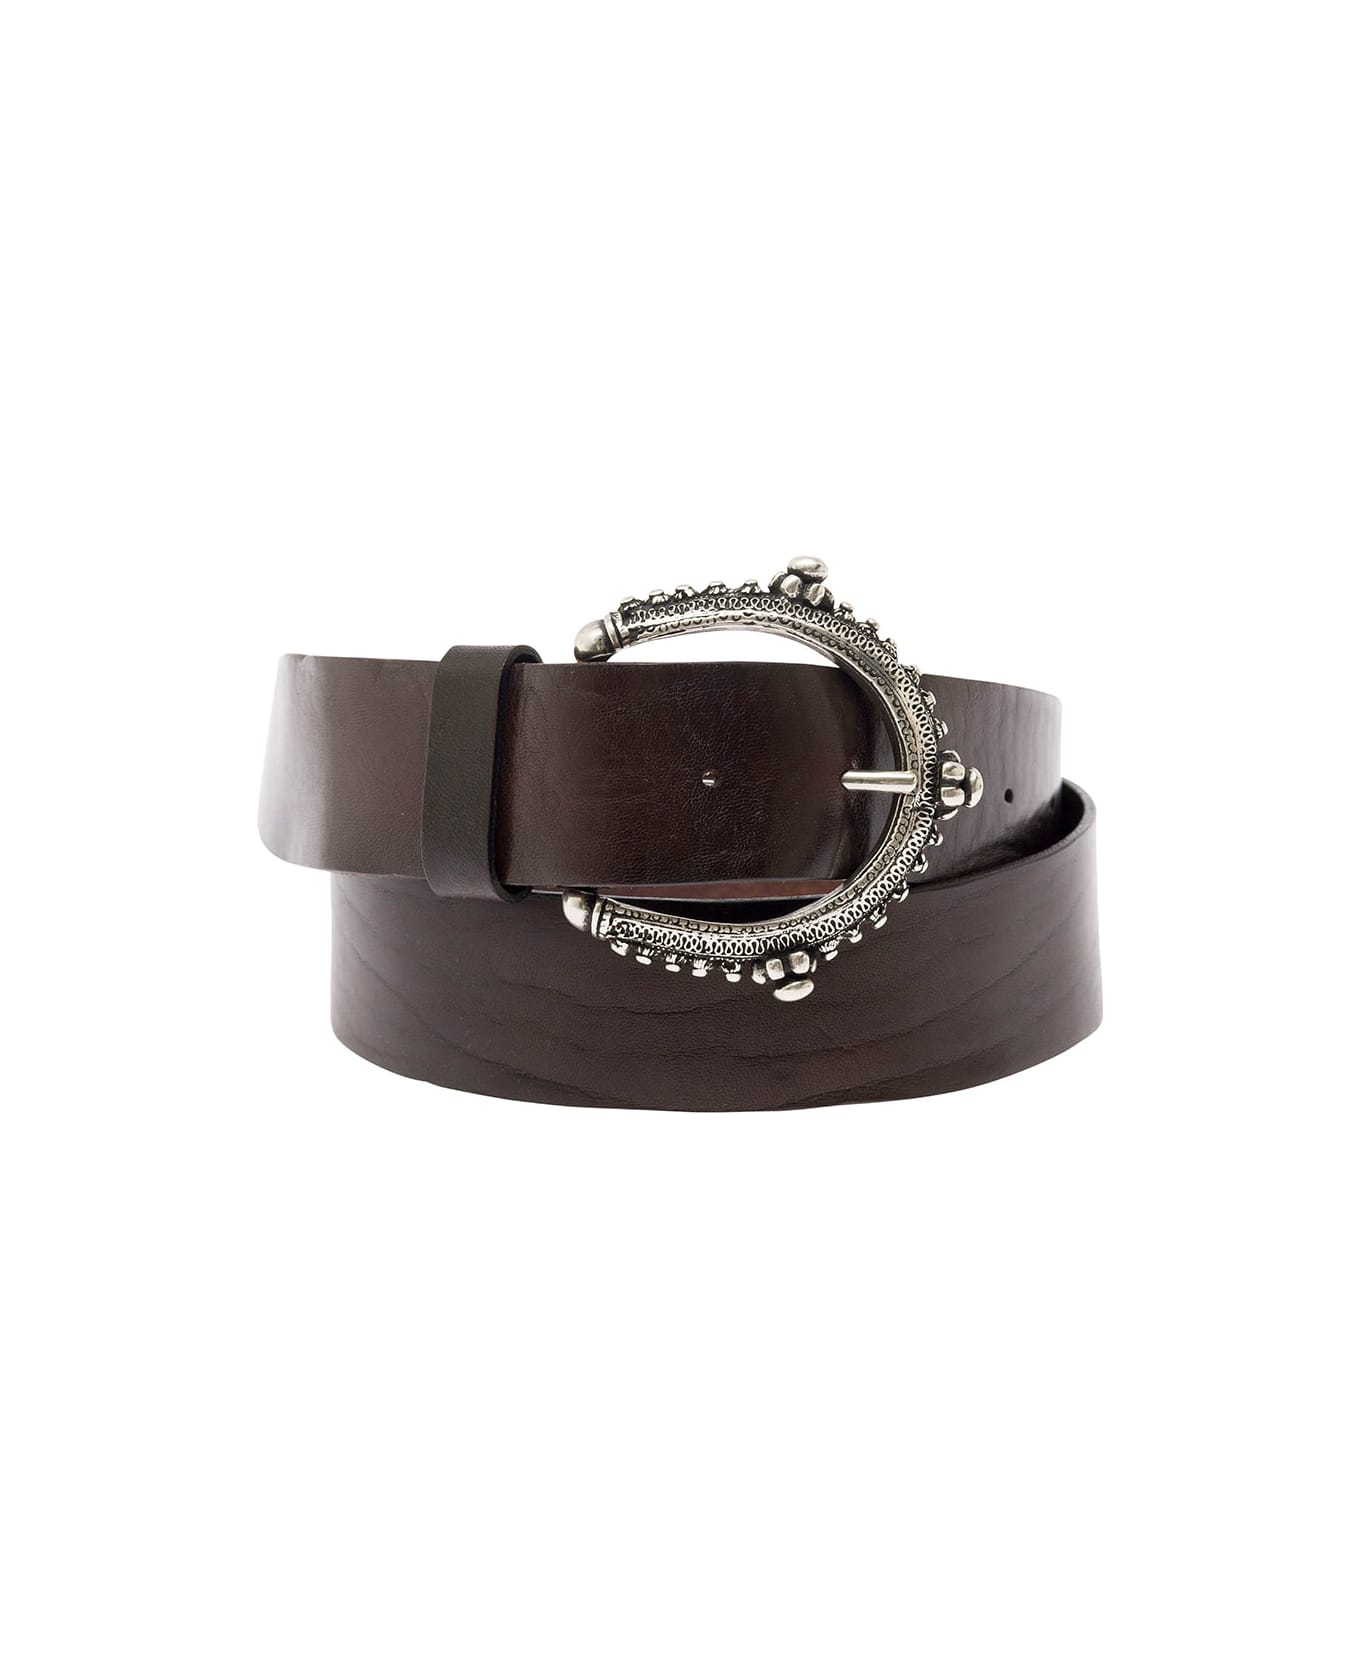 Parosh Brown Belt With Circle Buckle In Leather Woman - Brown